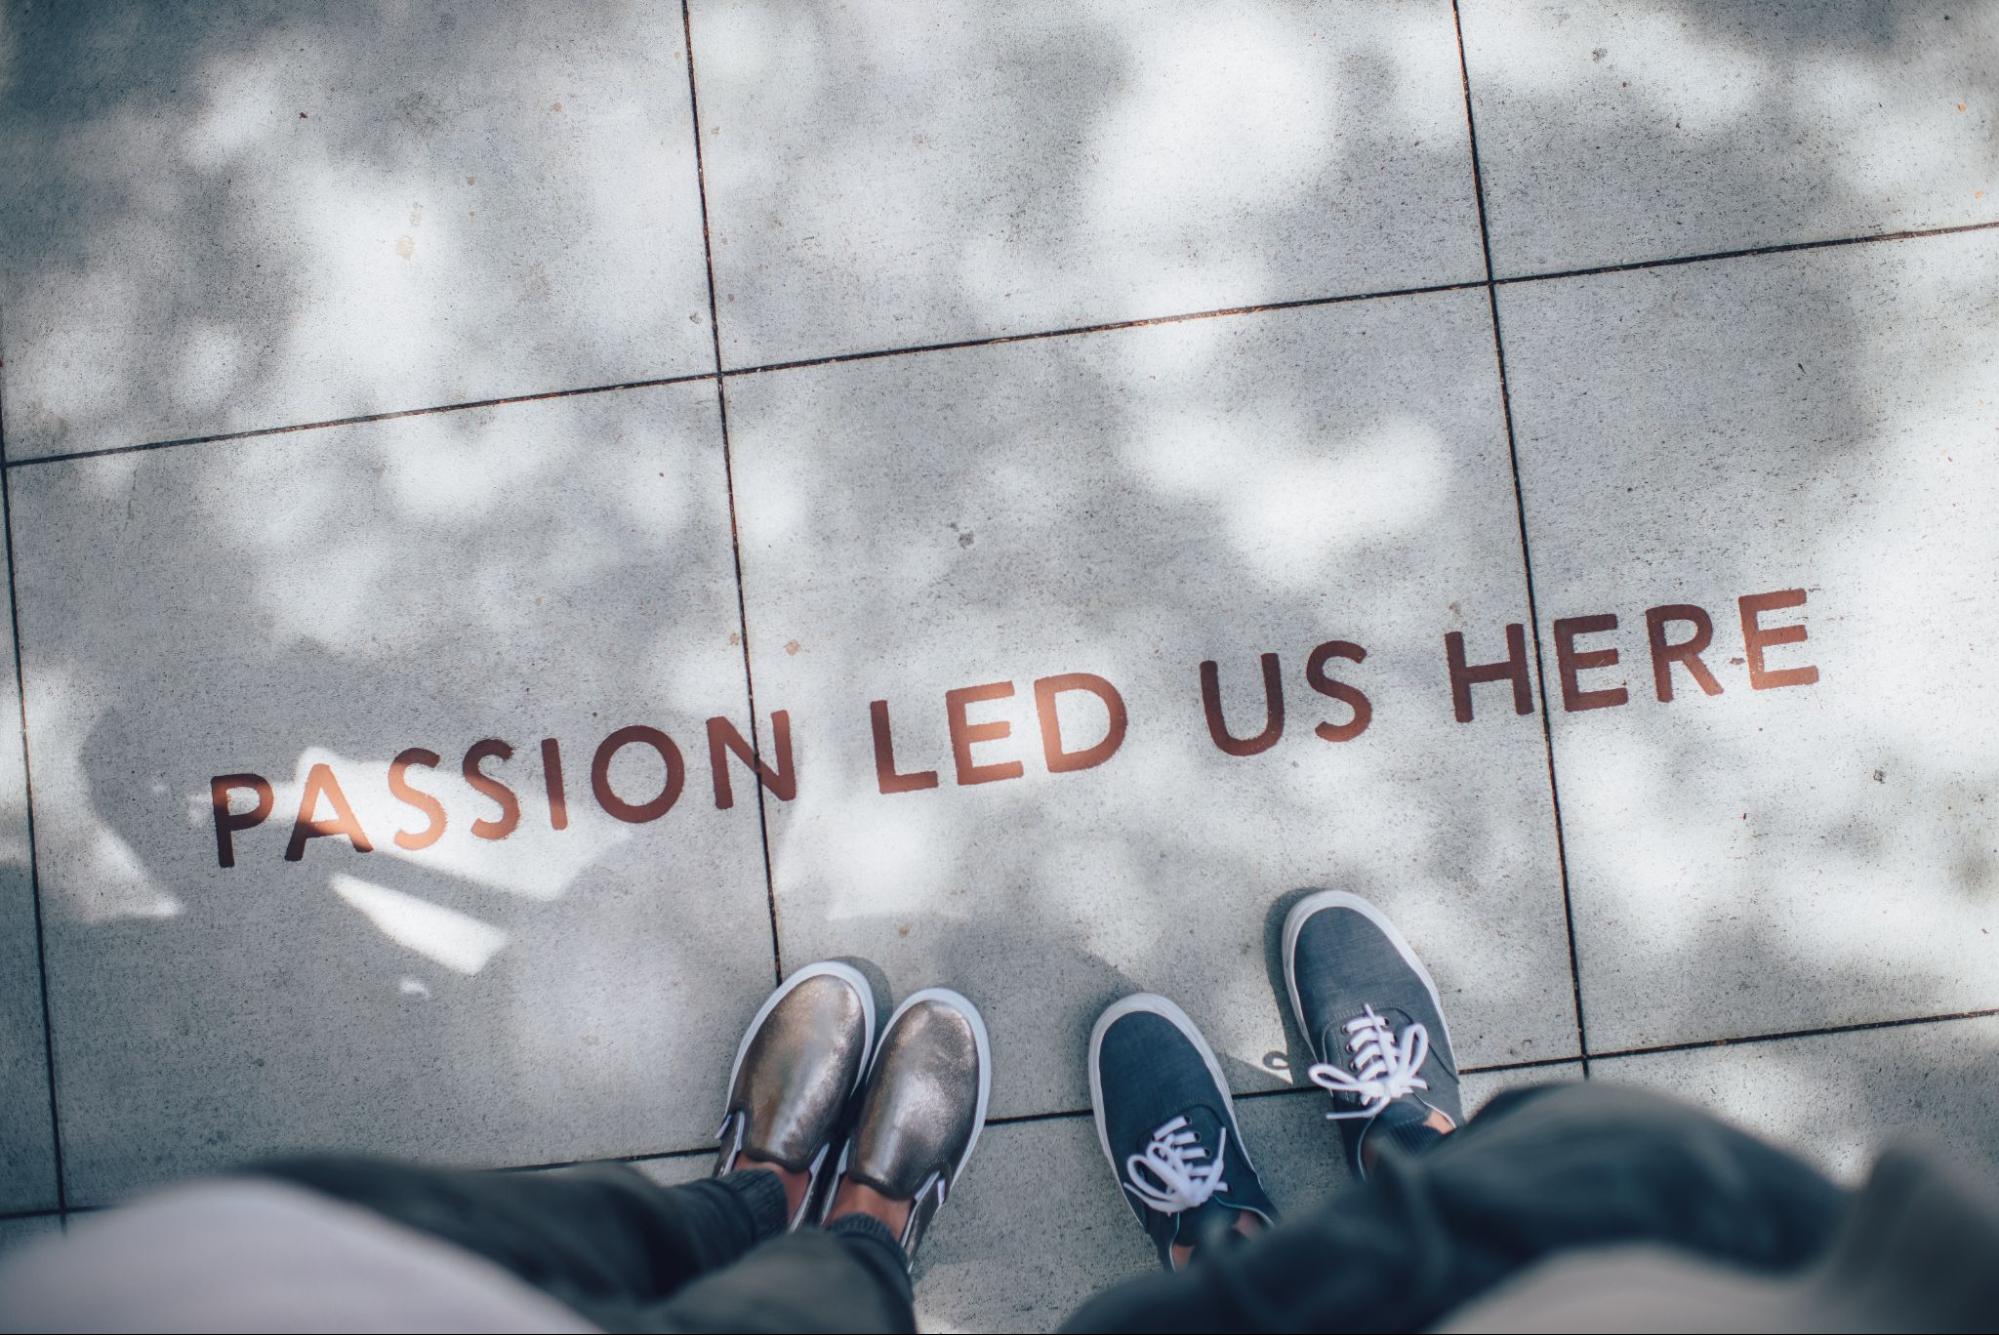 Two people standing on gray pavement, only shoes visible with text: “passion led us here”